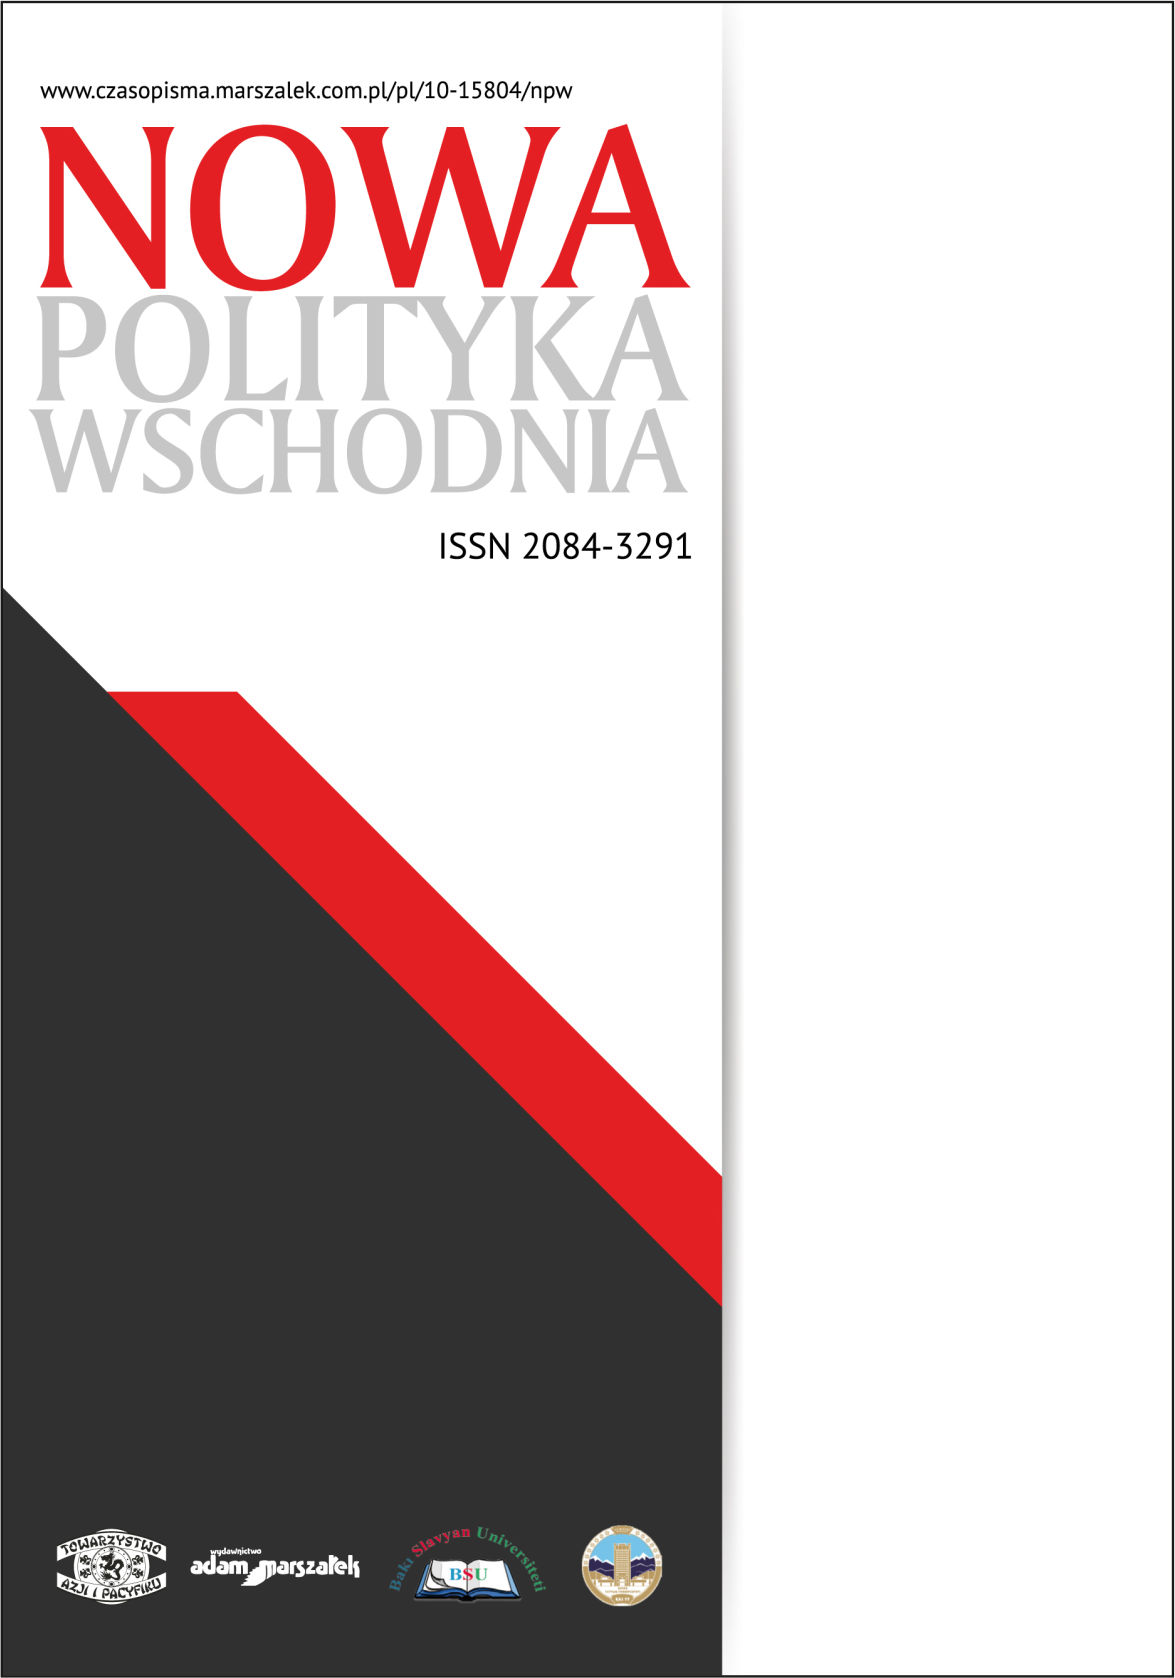 Assumptions of Law and Justice’s foreign policy towards Russia in the 2019 election program Cover Image